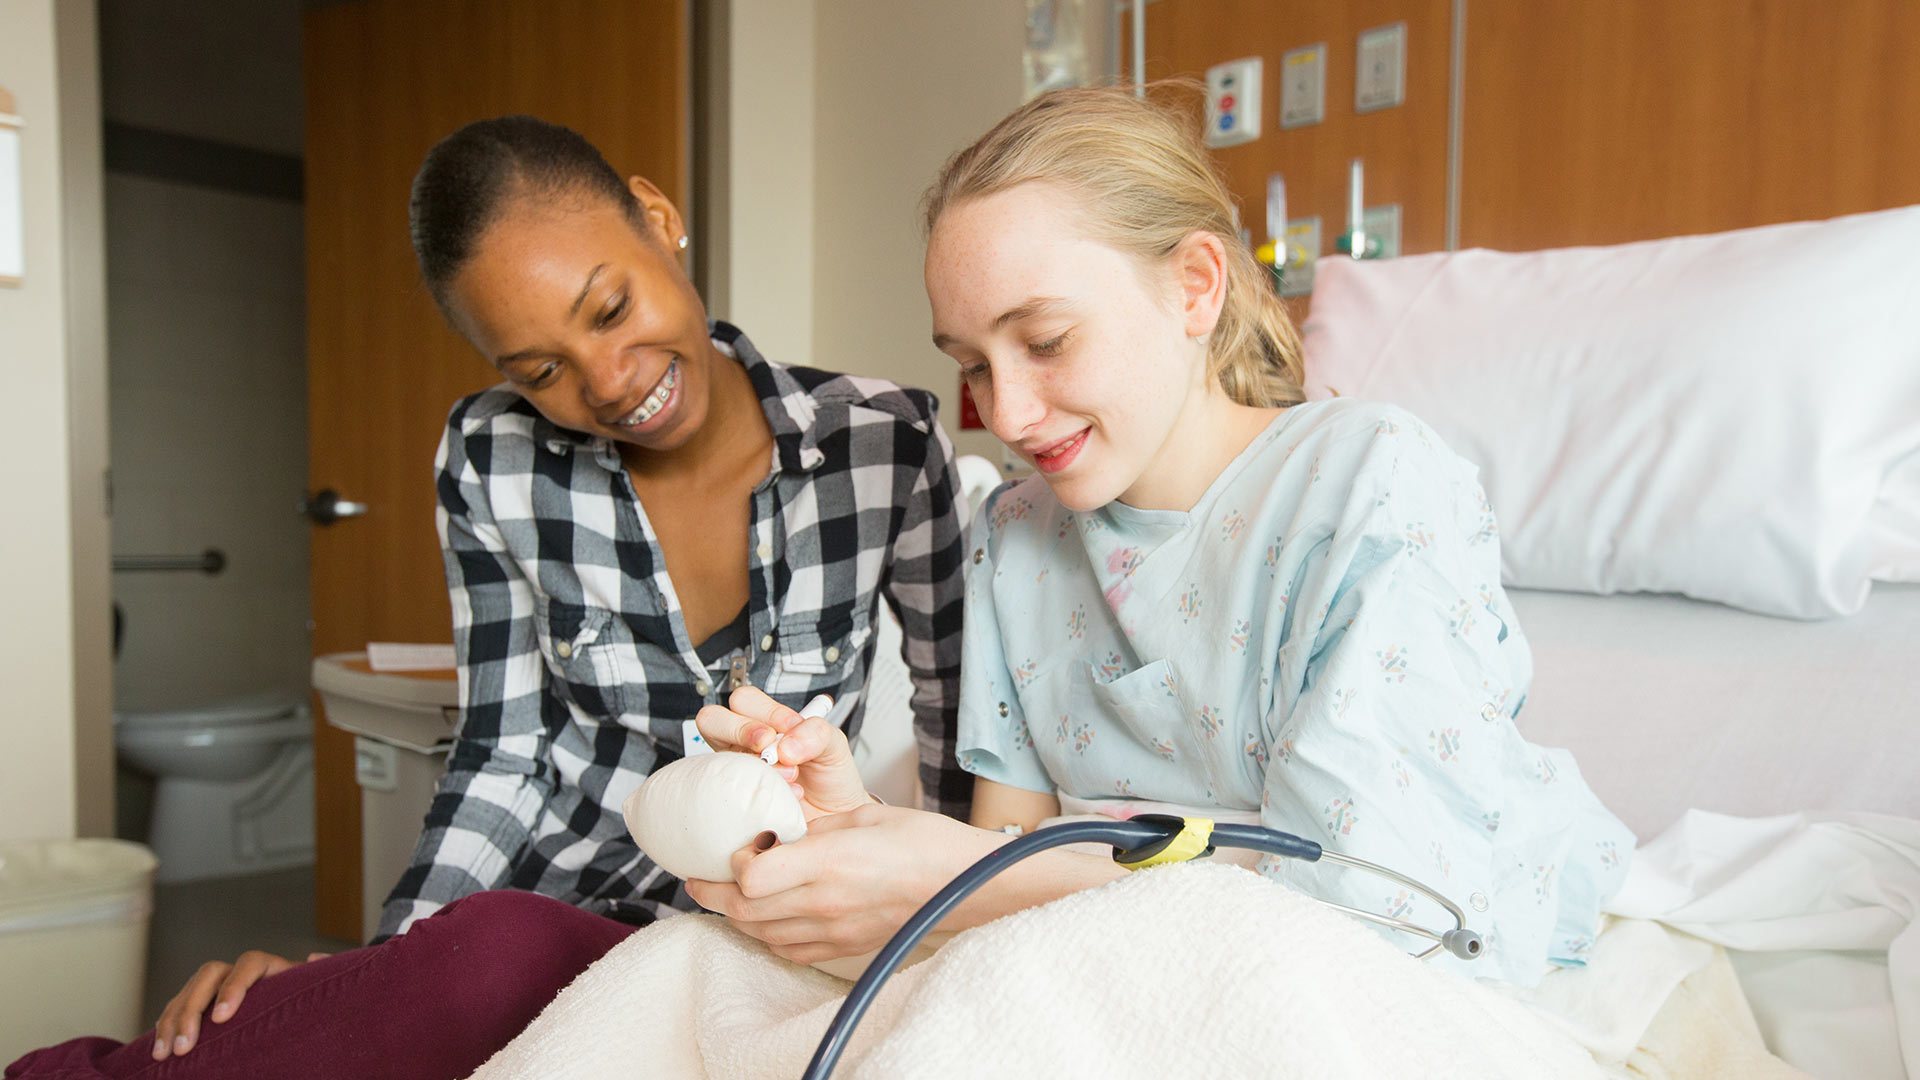 Child life student interacting with hospitalized kid